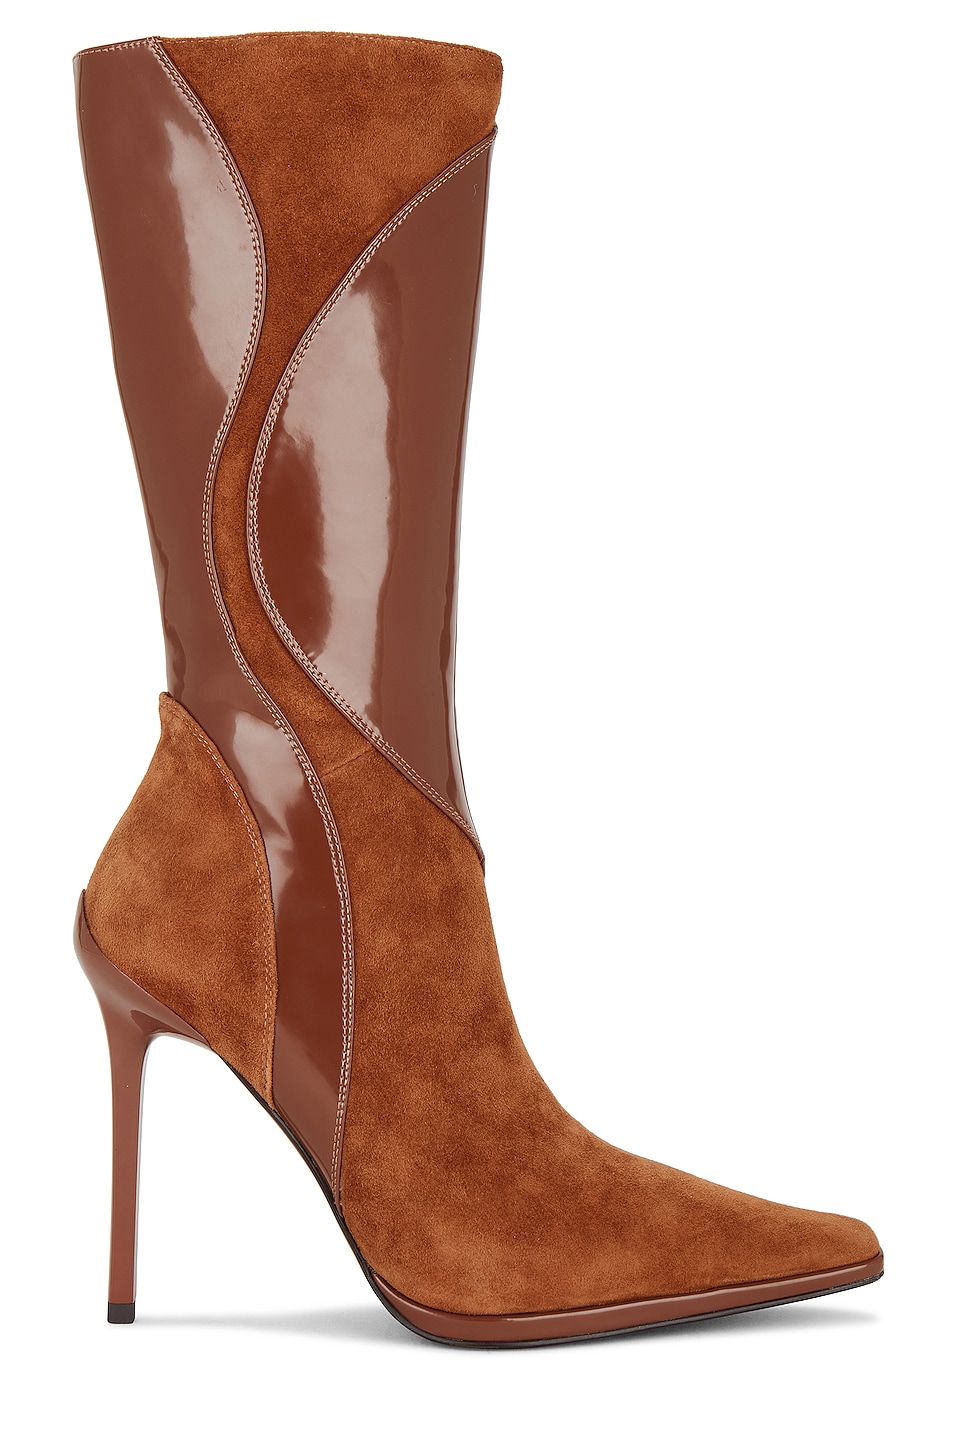 Jeffrey Campbell Scylla Boot in Brown Suede Combo